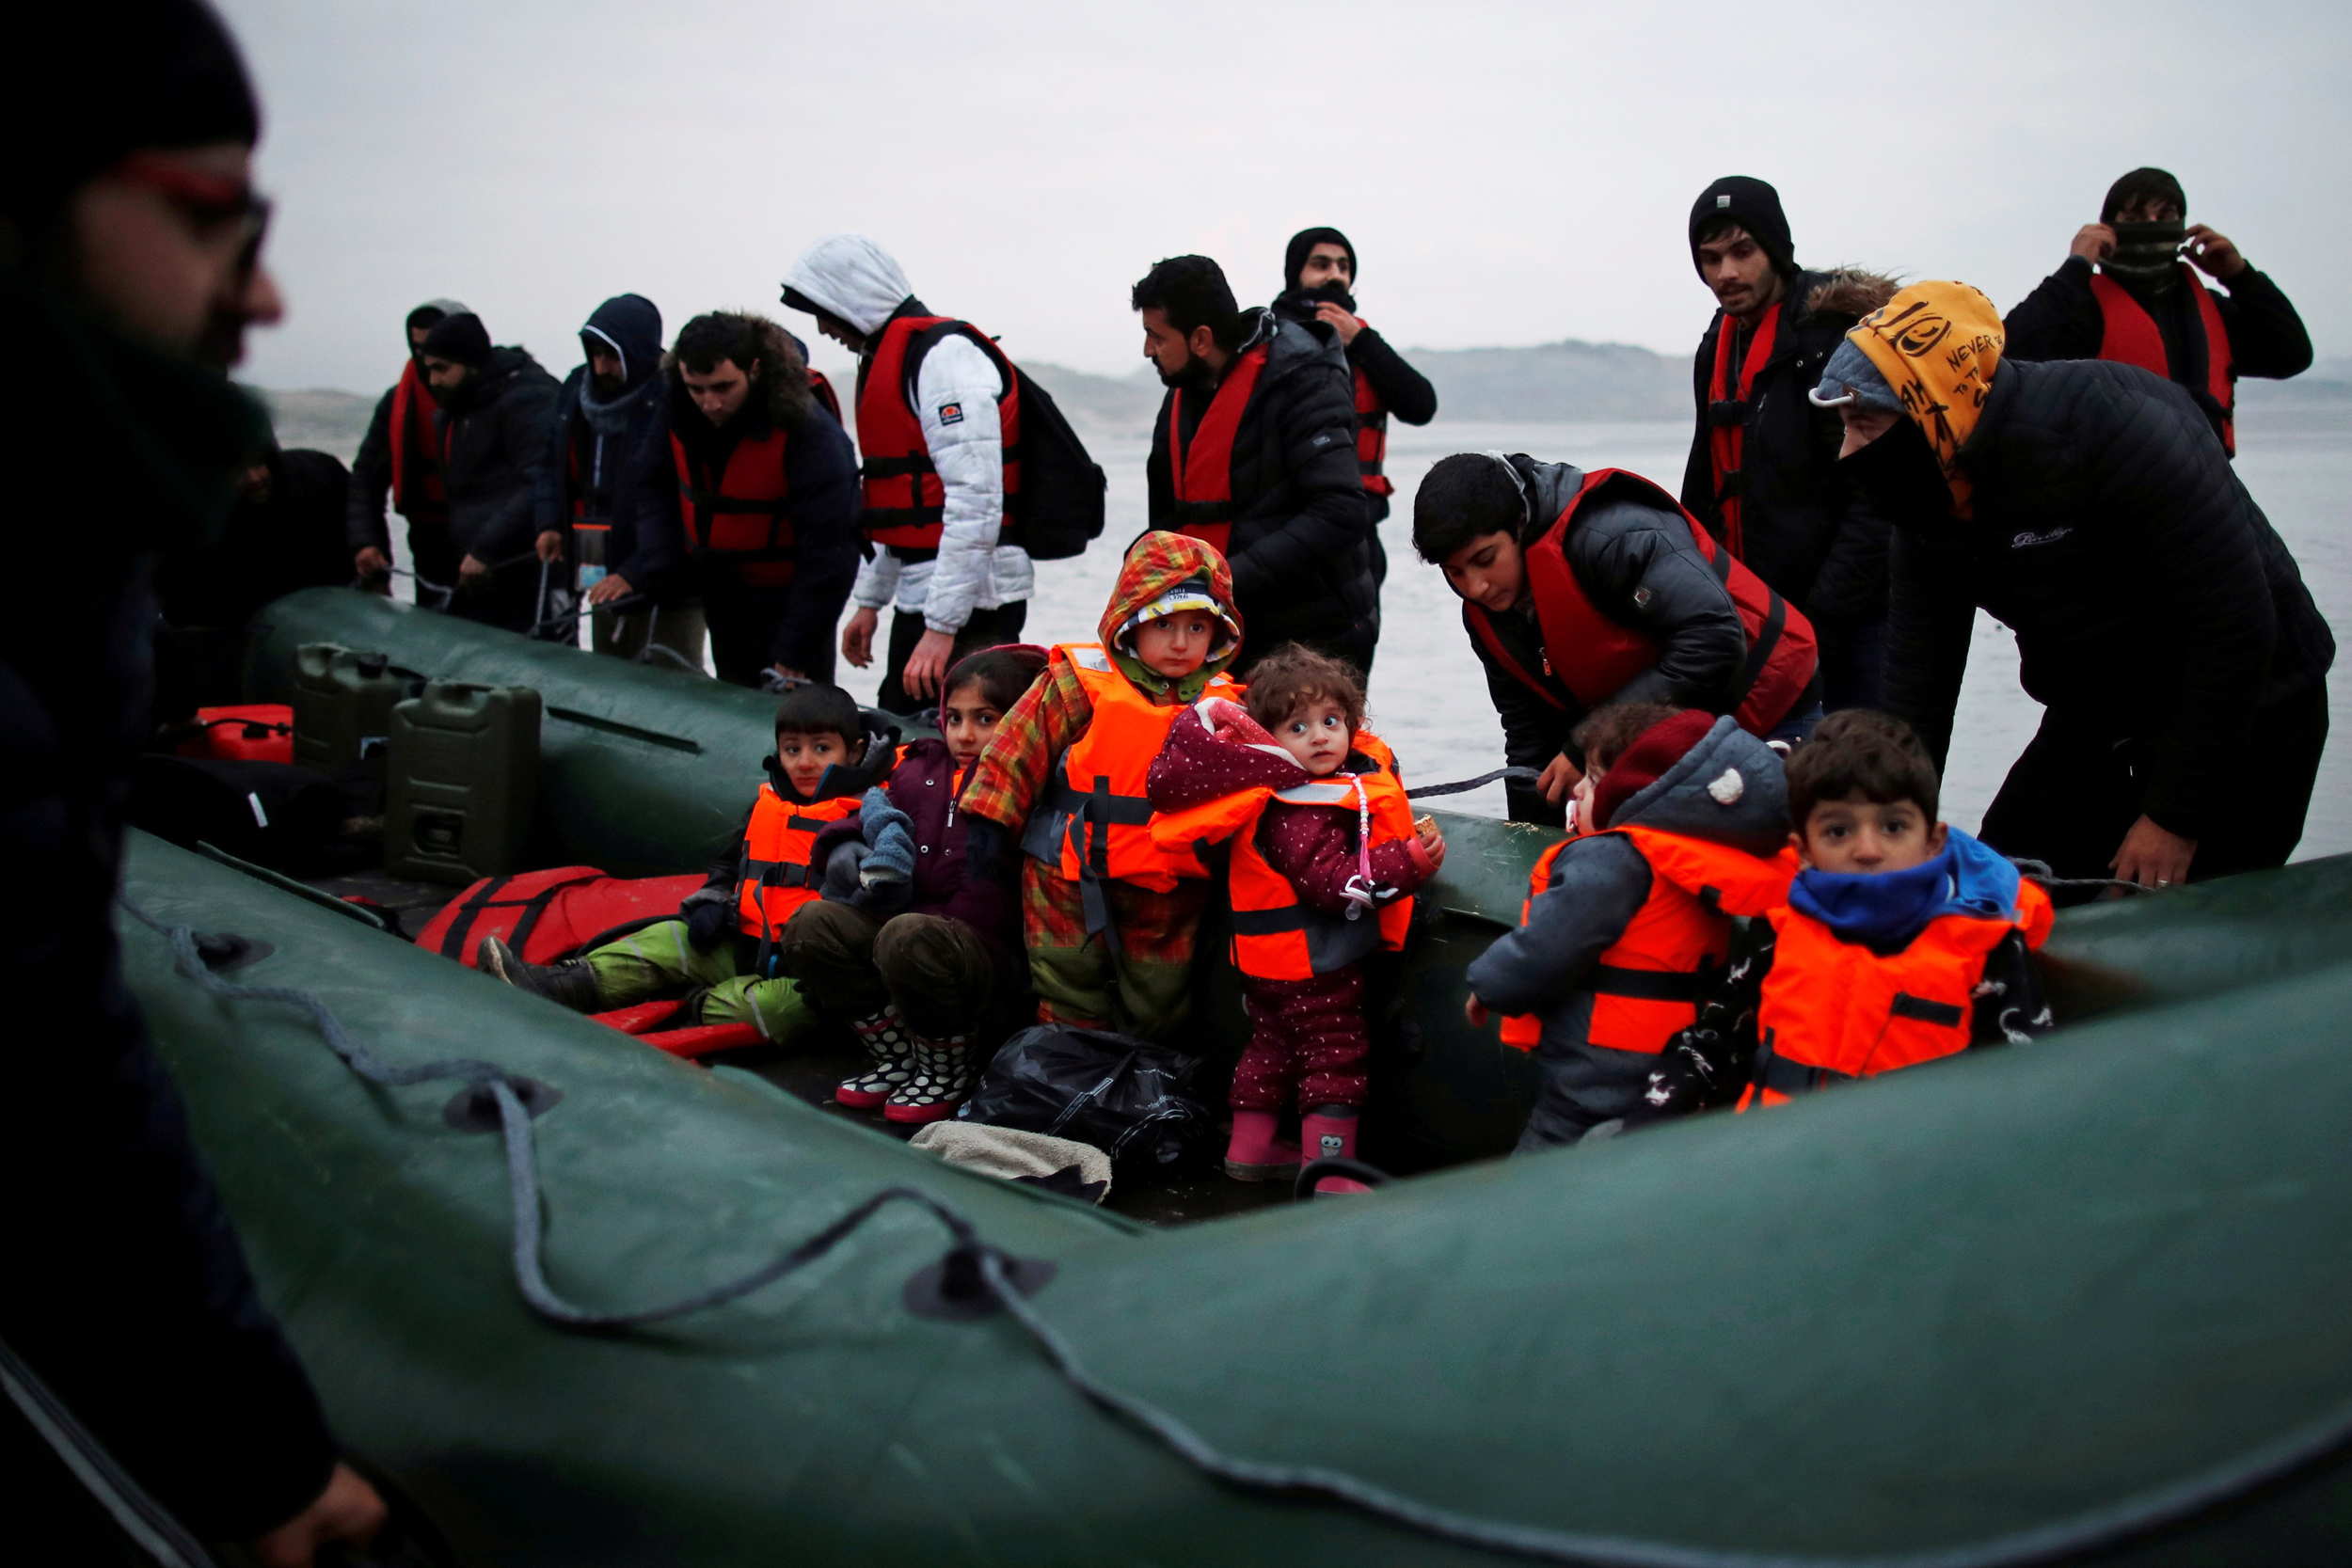 A group of more than 40 migrants with children get on an inflatable dinghy, as they leave the coast of northern France to cross the English Channel, near Wimereux, France, November 24, 2021.